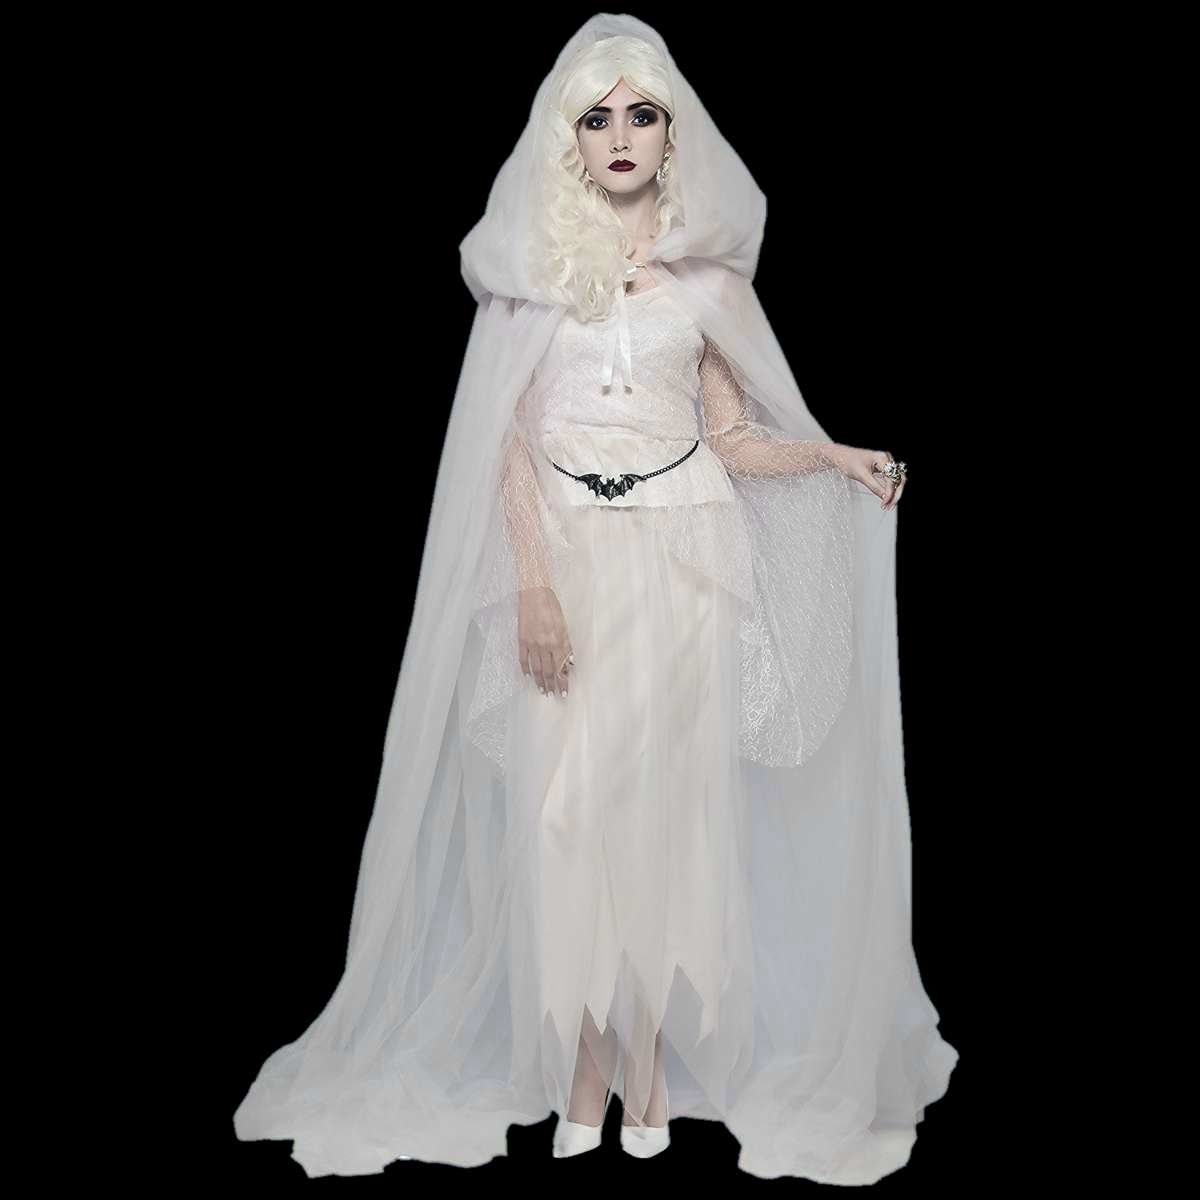 White tulle hooded cape | MostlyDead.com